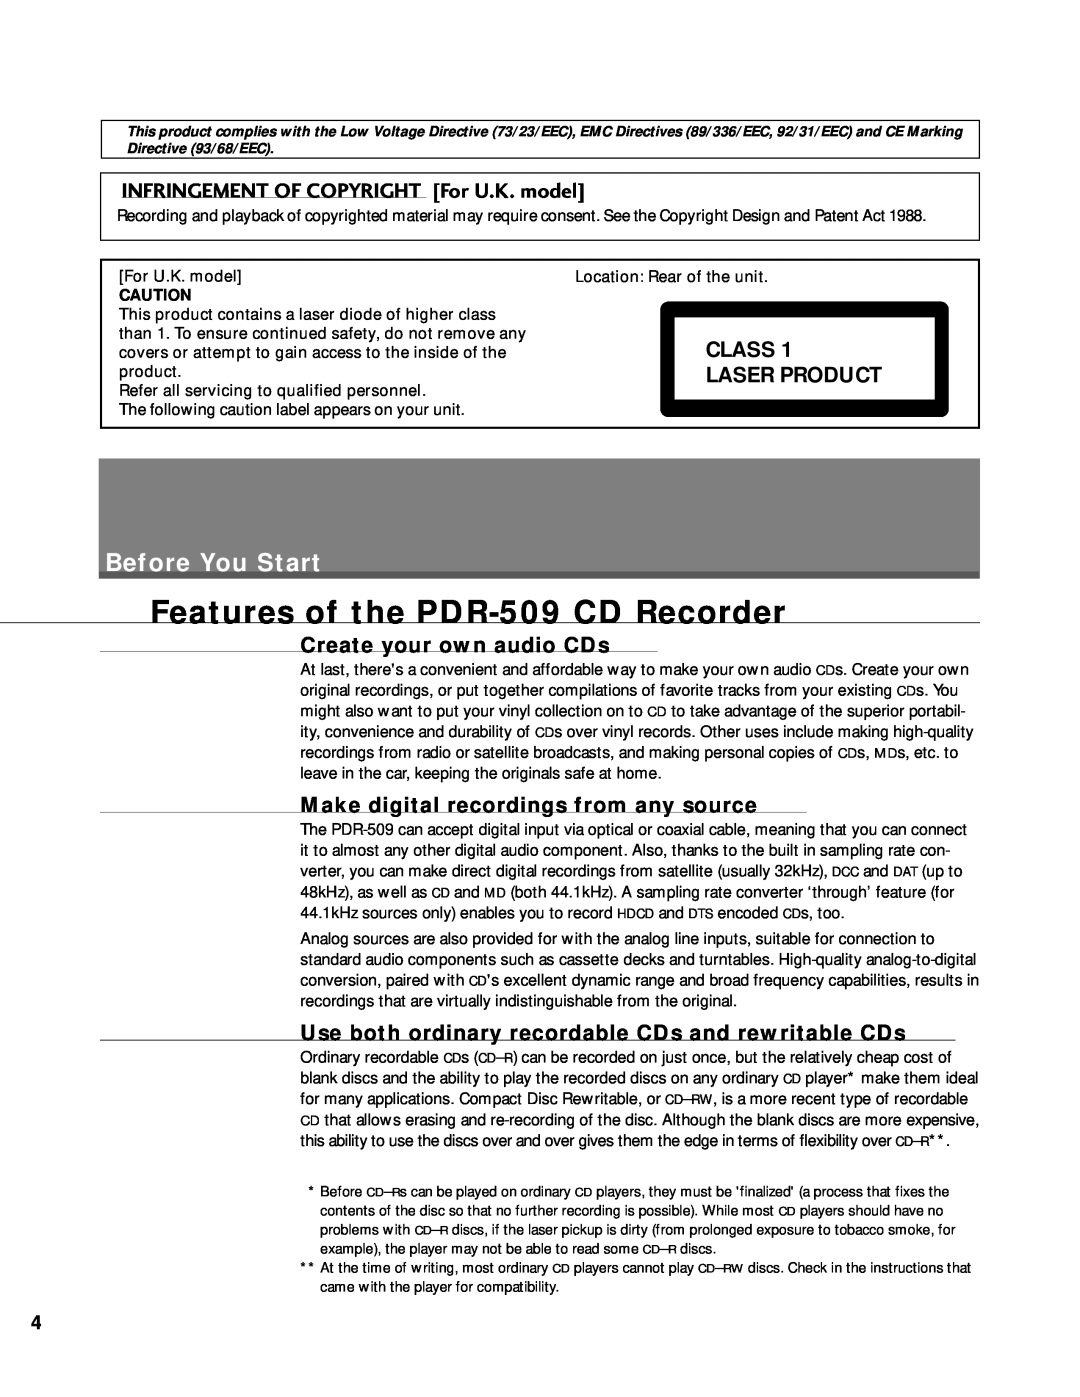 Pioneer manual Features of the PDR-509CD Recorder, Before You Start, INFRINGEMENT OF COPYRIGHT For U.K. model 